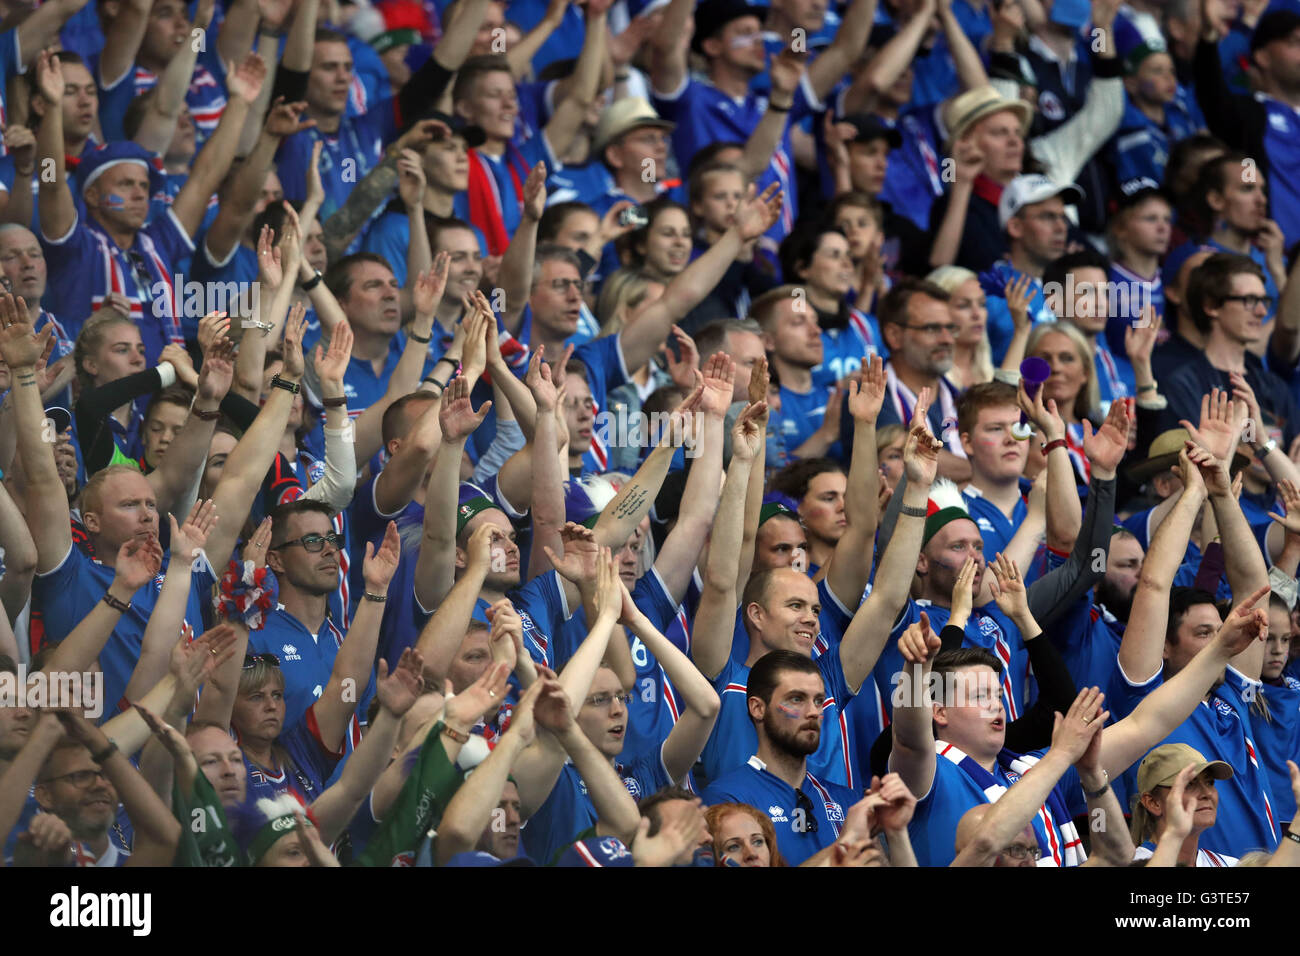 SAINT ETIENNE- FRANCE,  J UNE 2016 :  Iceland supporters in action during football match  of Euro 2016  in France between Portugal vs Island at the stade geoffroy guichard on June 14, 2016 in Saint Etienne Stock Photo